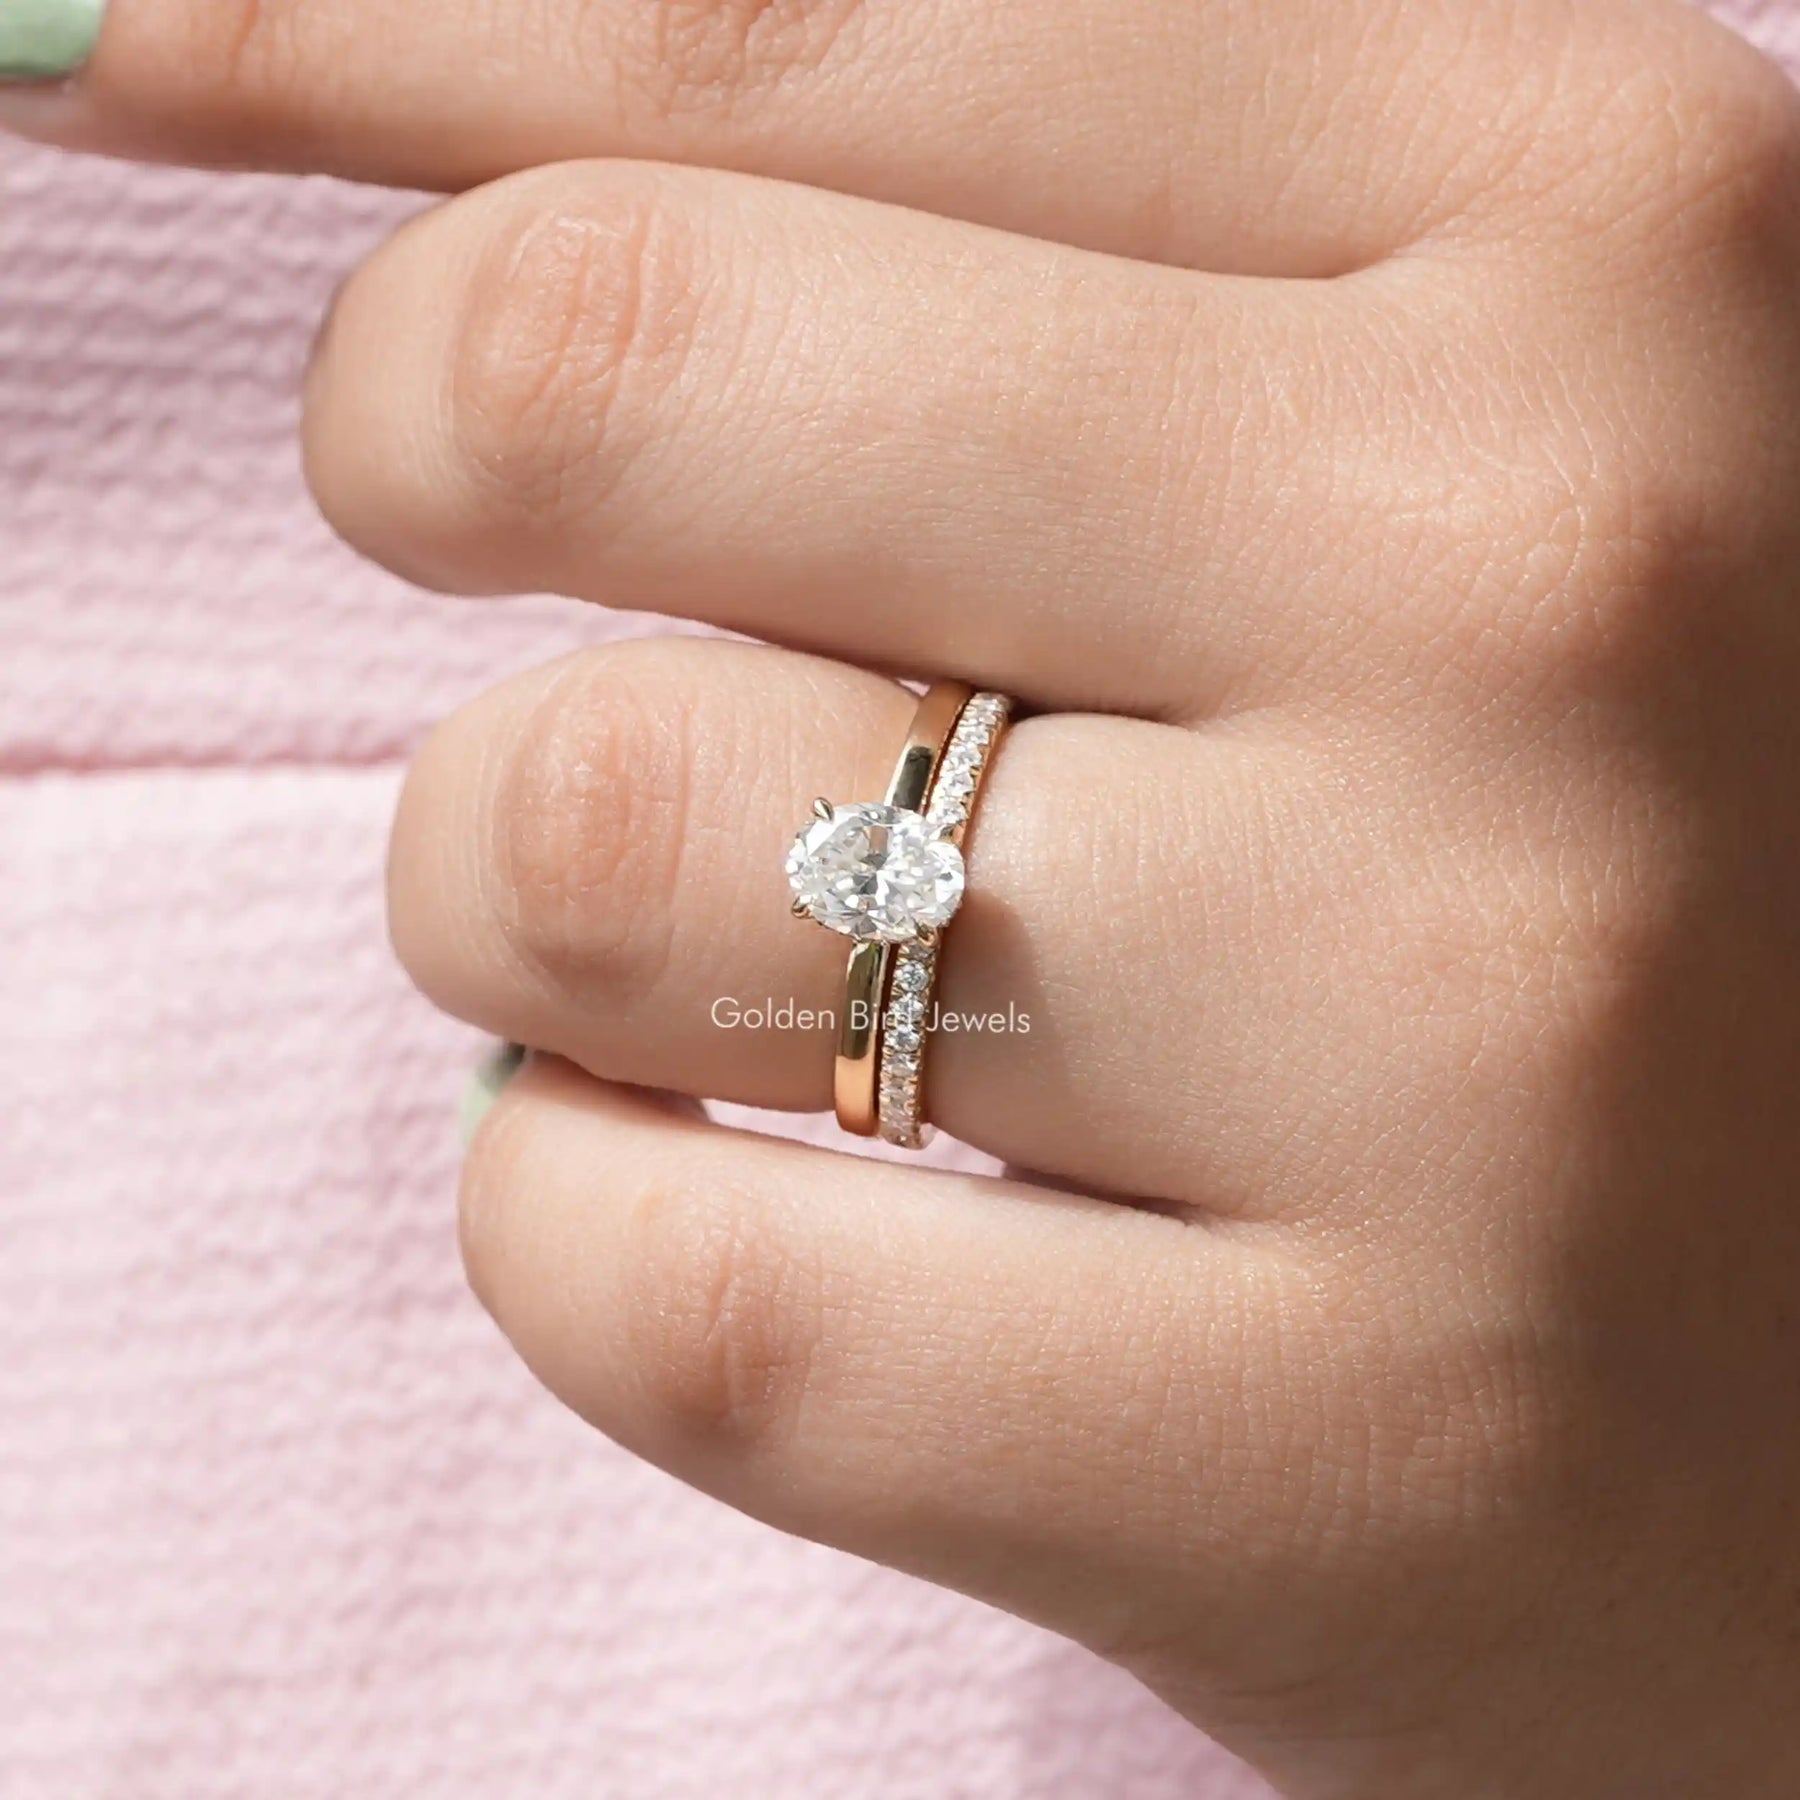 [This hidden halo oval cut moissanite ring made of four prongs]-[Golden Bird Jewels]